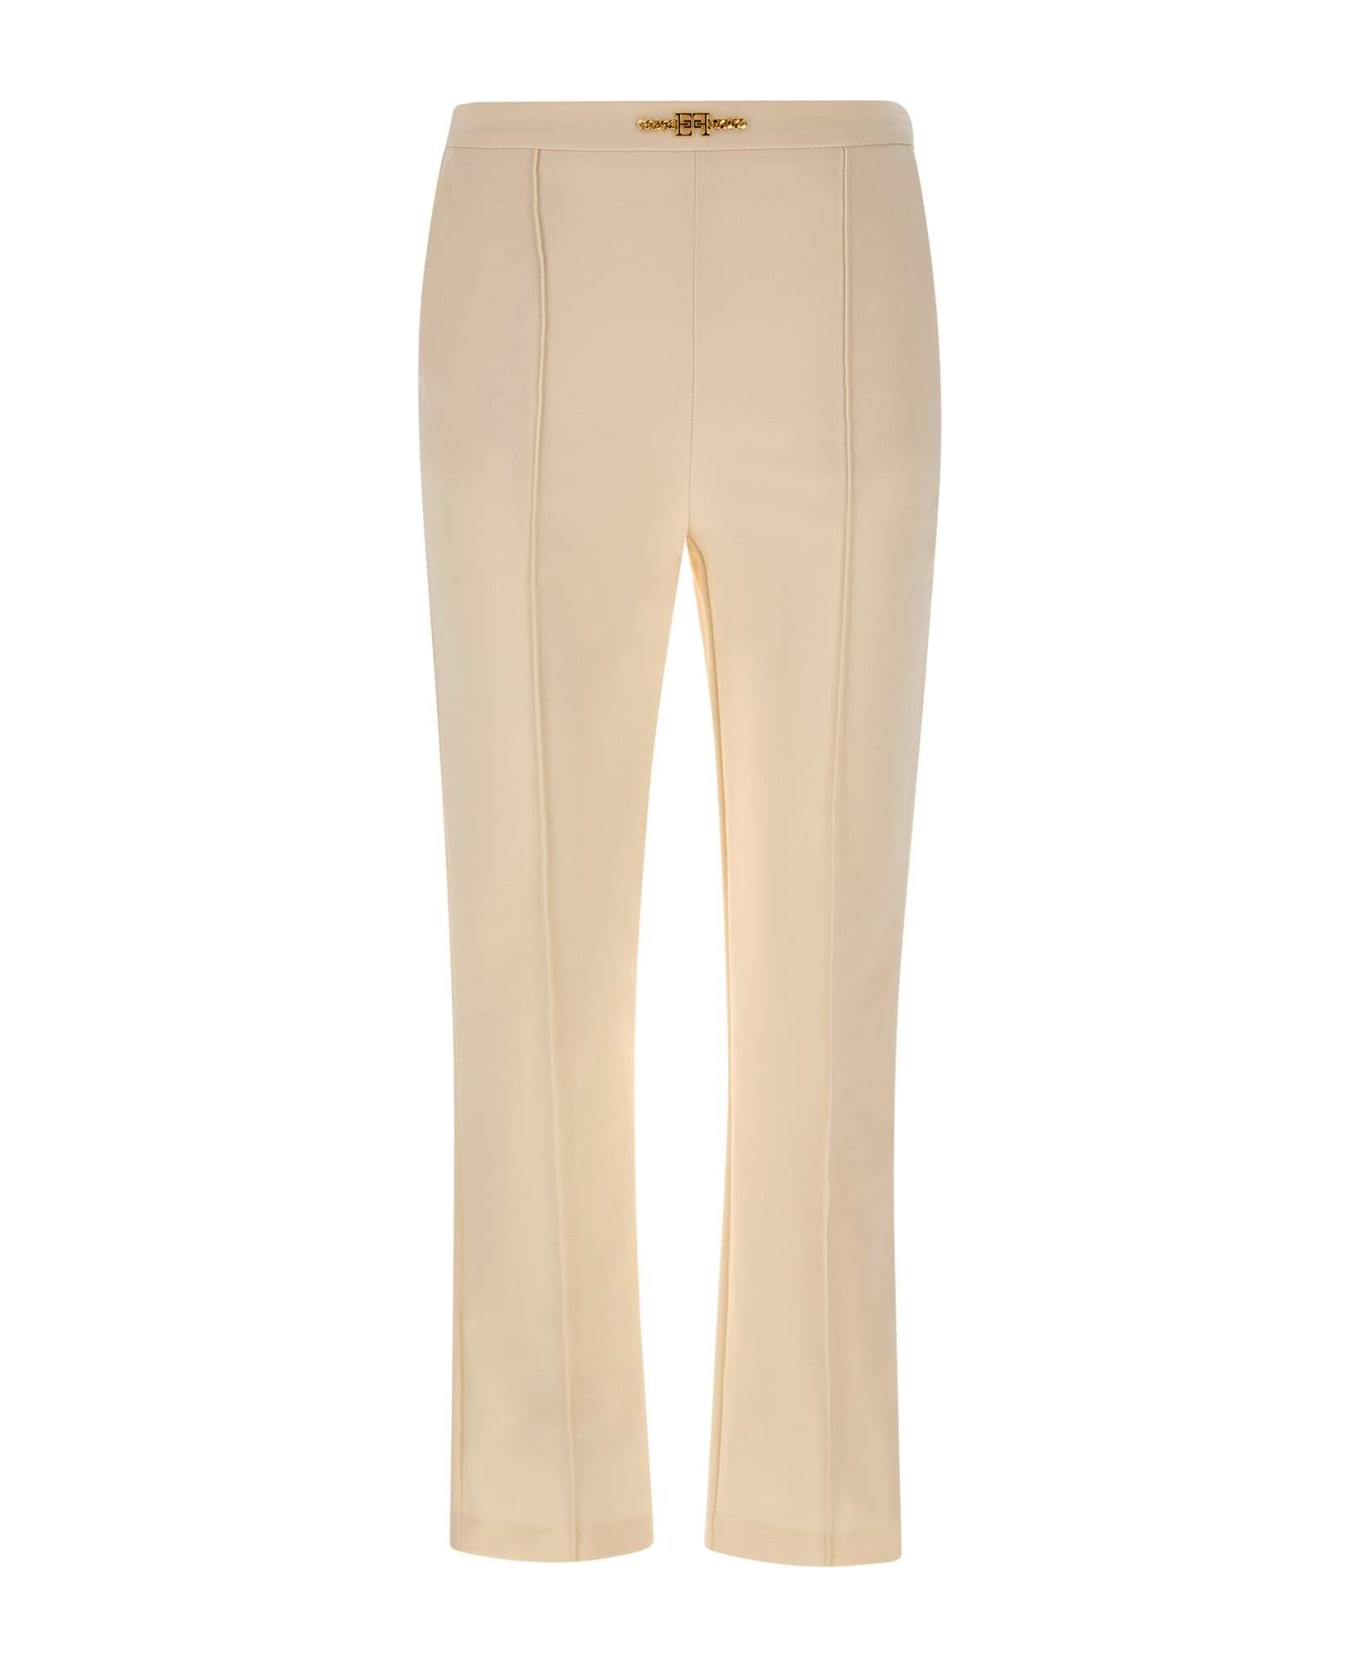 Elisabetta Franchi 'daily' Trousers - BEIGE ボトムス